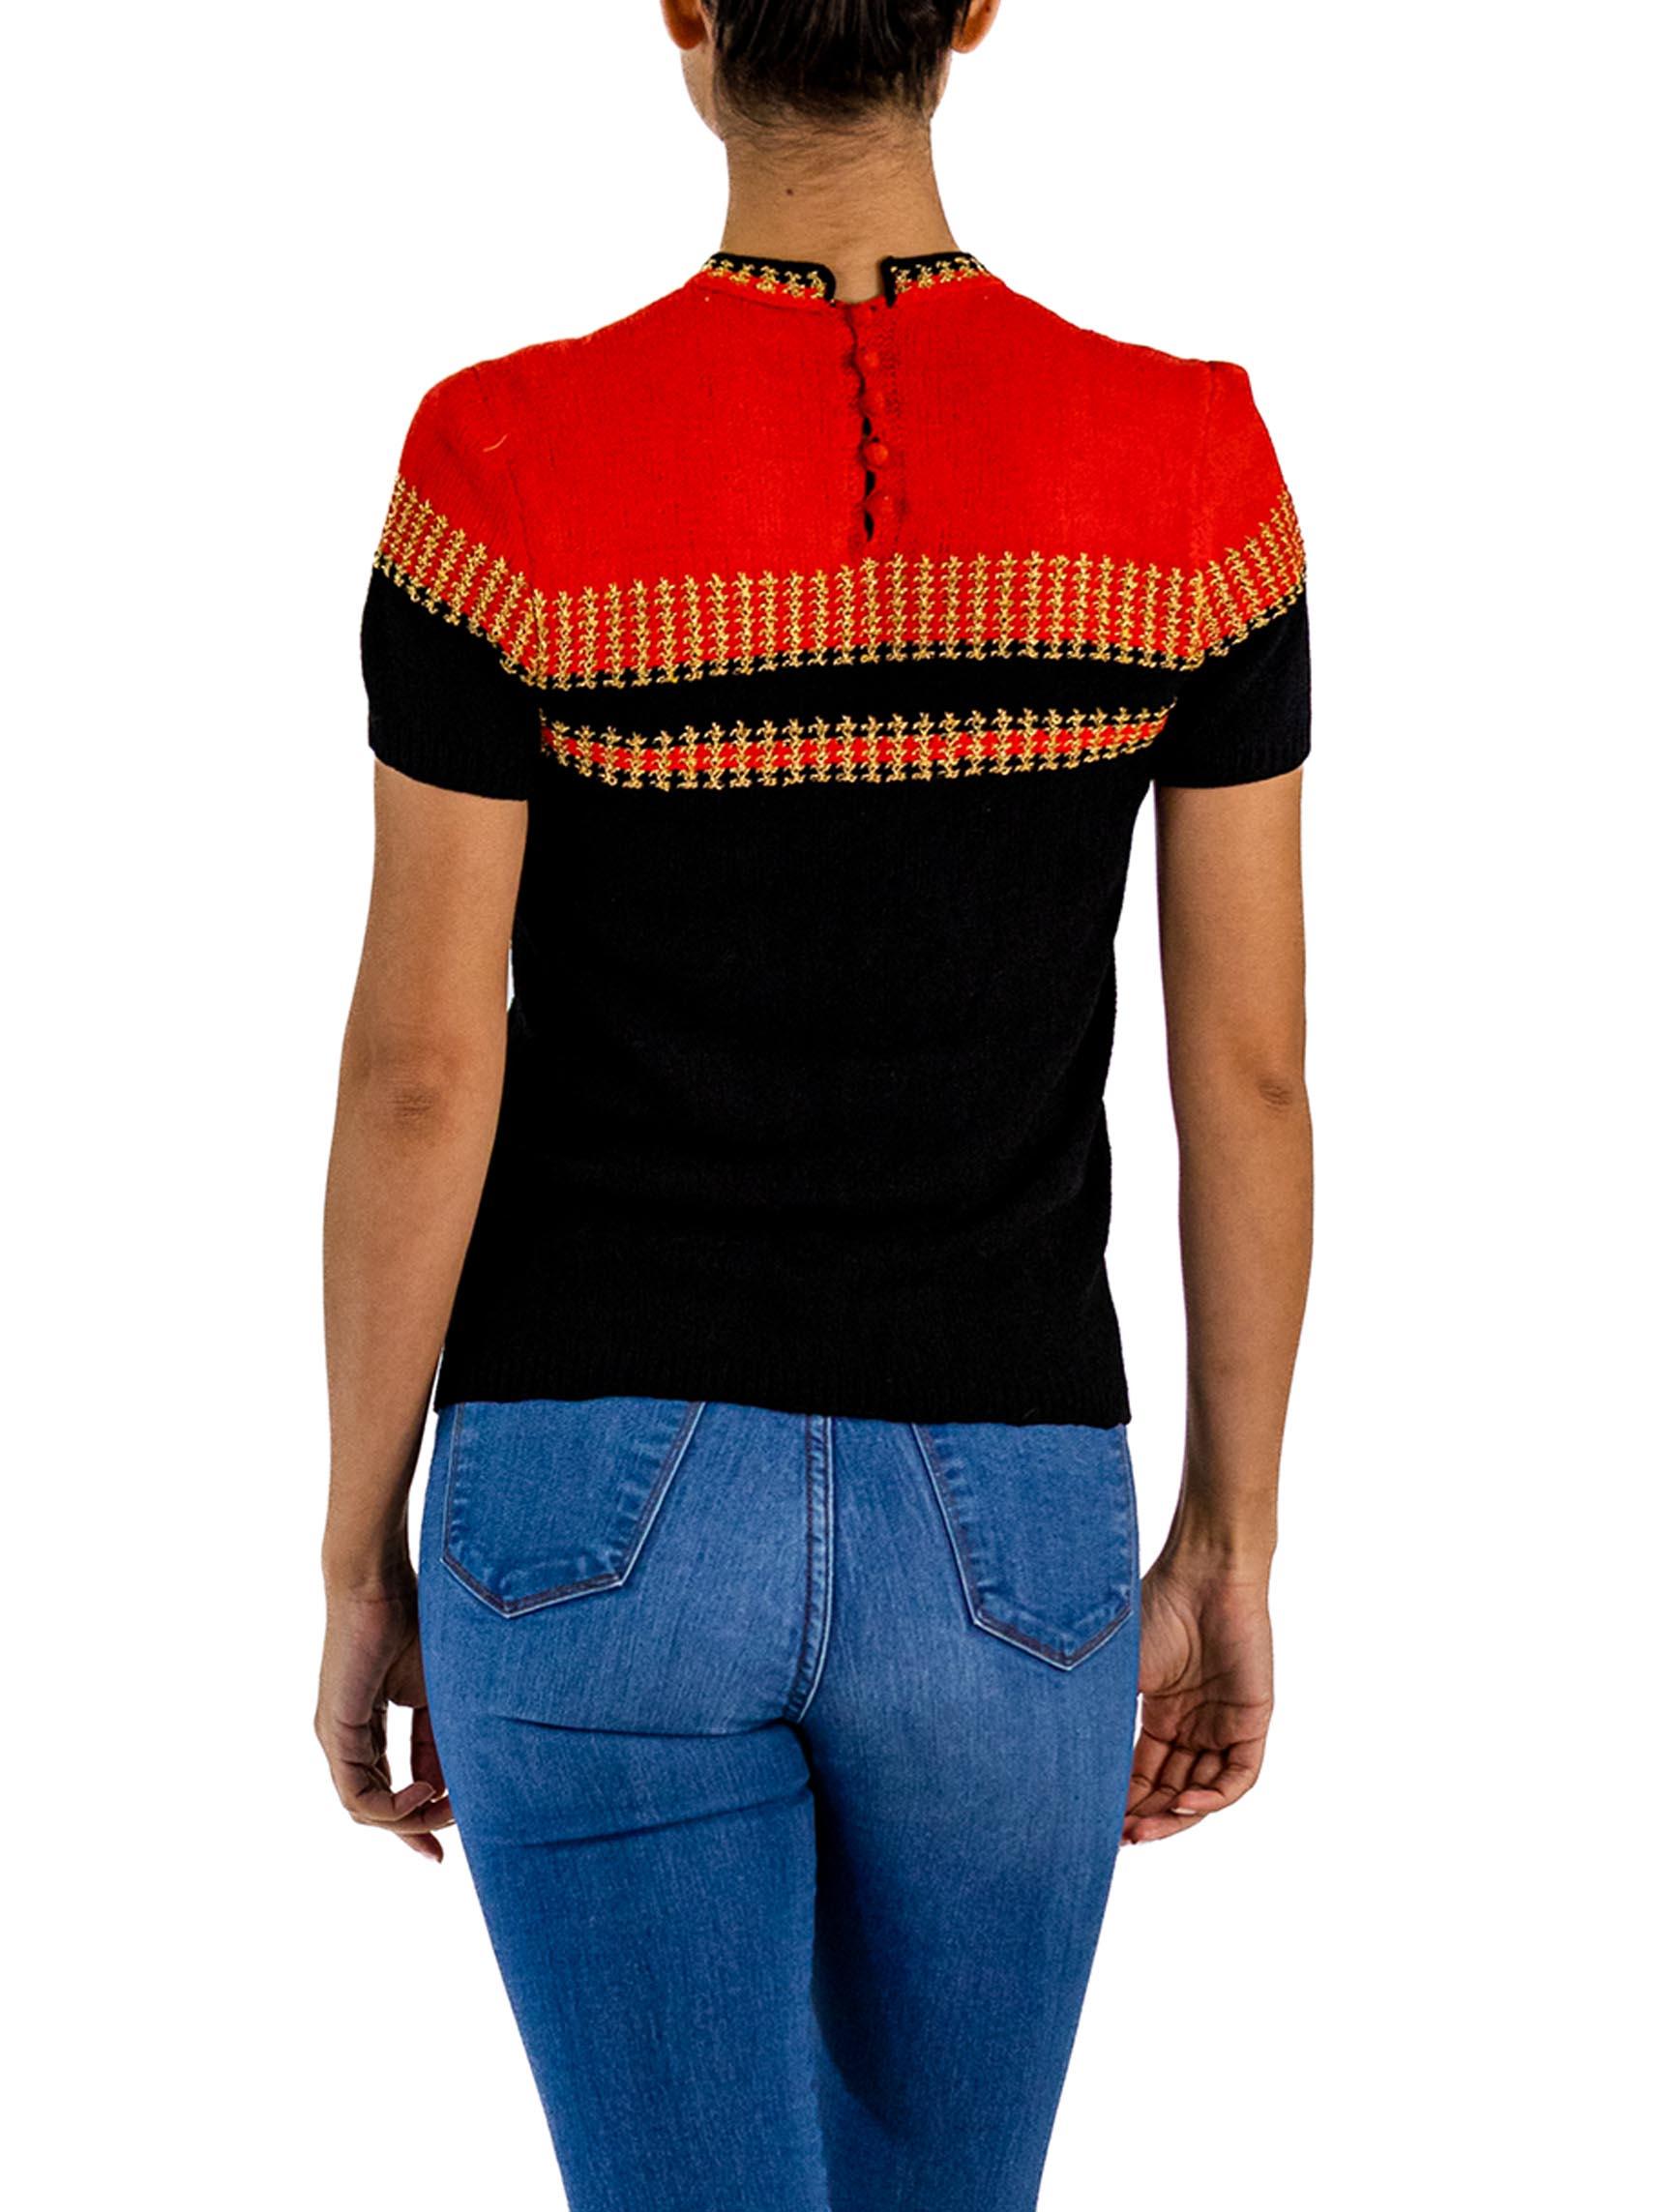 Women's 1940S Black & Red Rayon Hand Knit Top With Metallic Gold Details For Sale